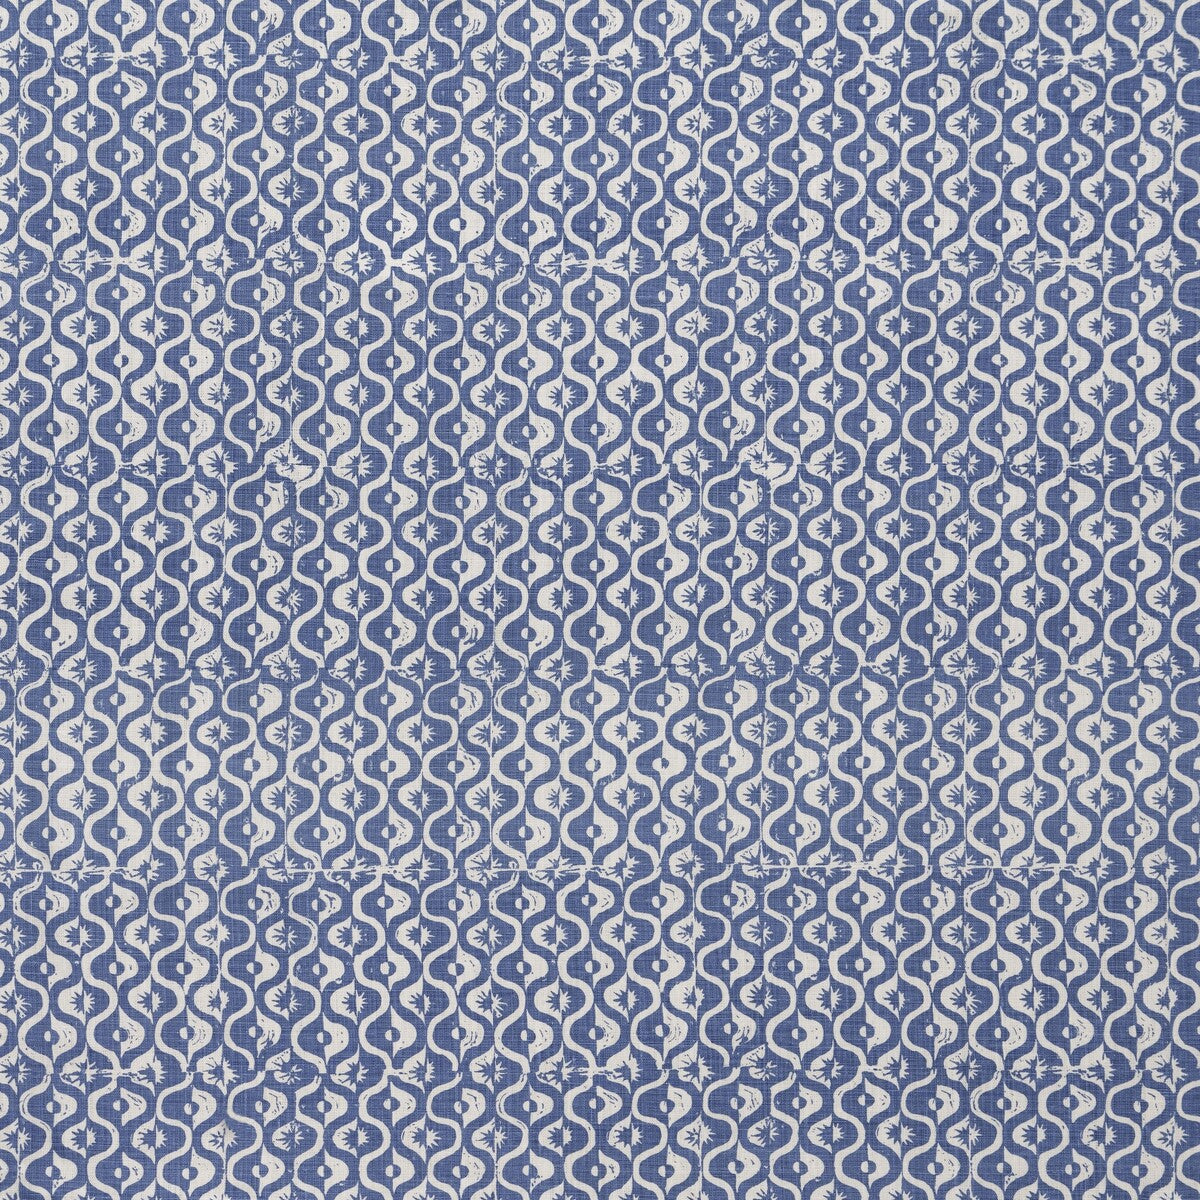 Small Medallion fabric in azure color - pattern BFC-3669.5.0 - by Lee Jofa in the Blithfield collection